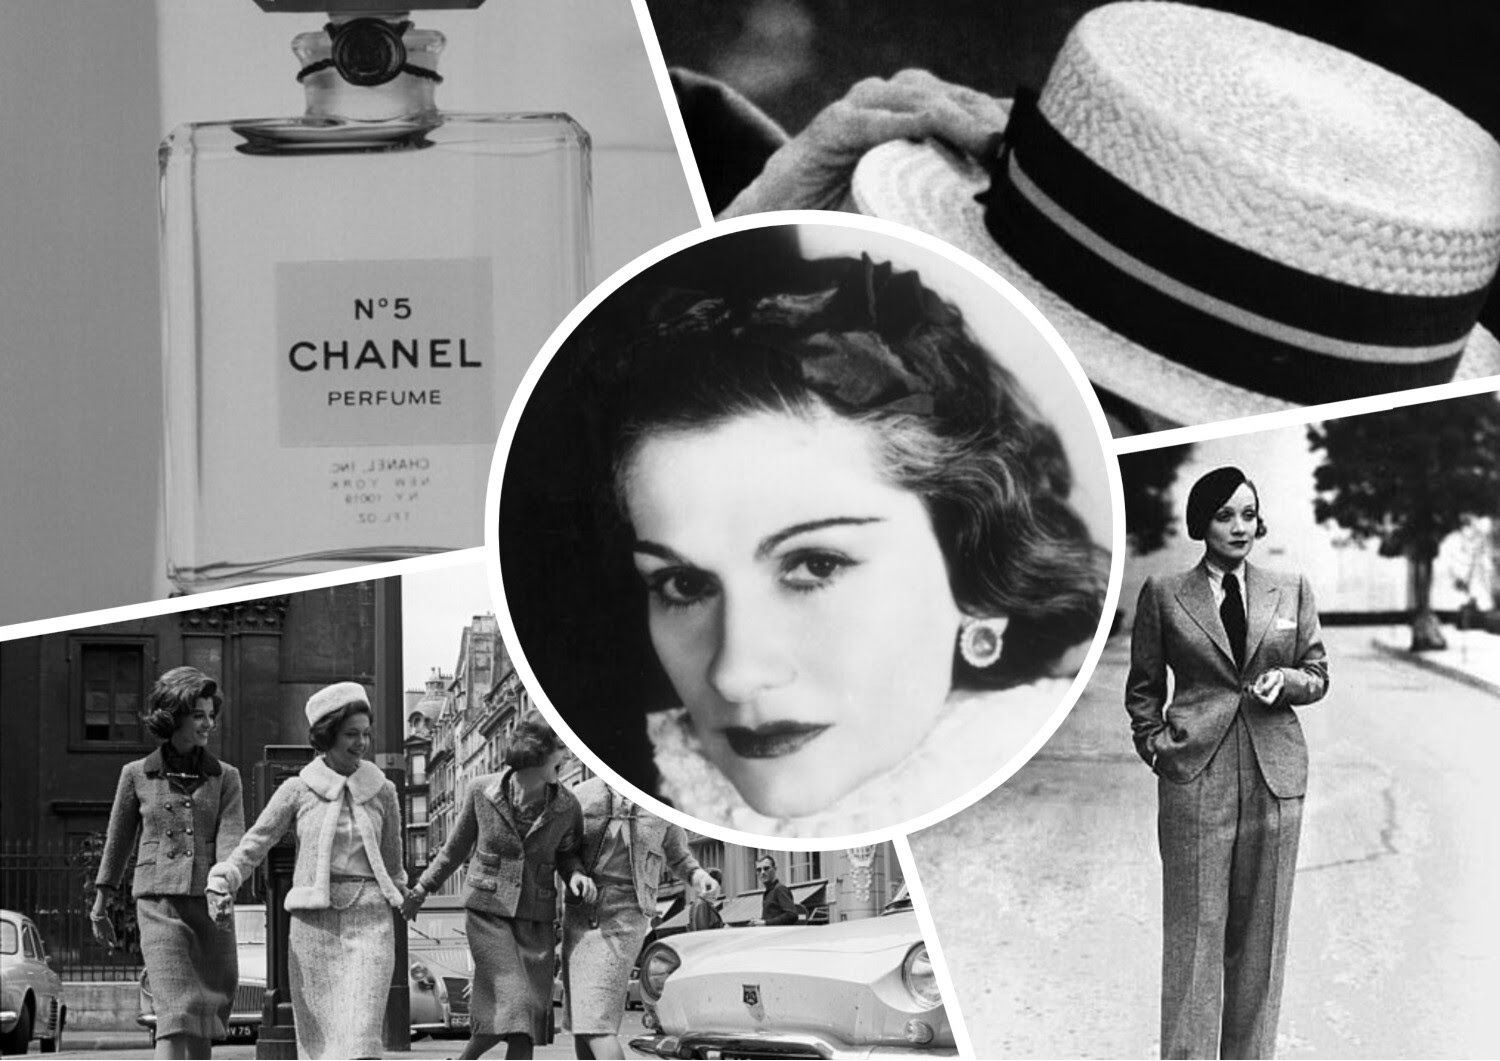 Top 5 films about life of Coco Chanel - HeyUGuys